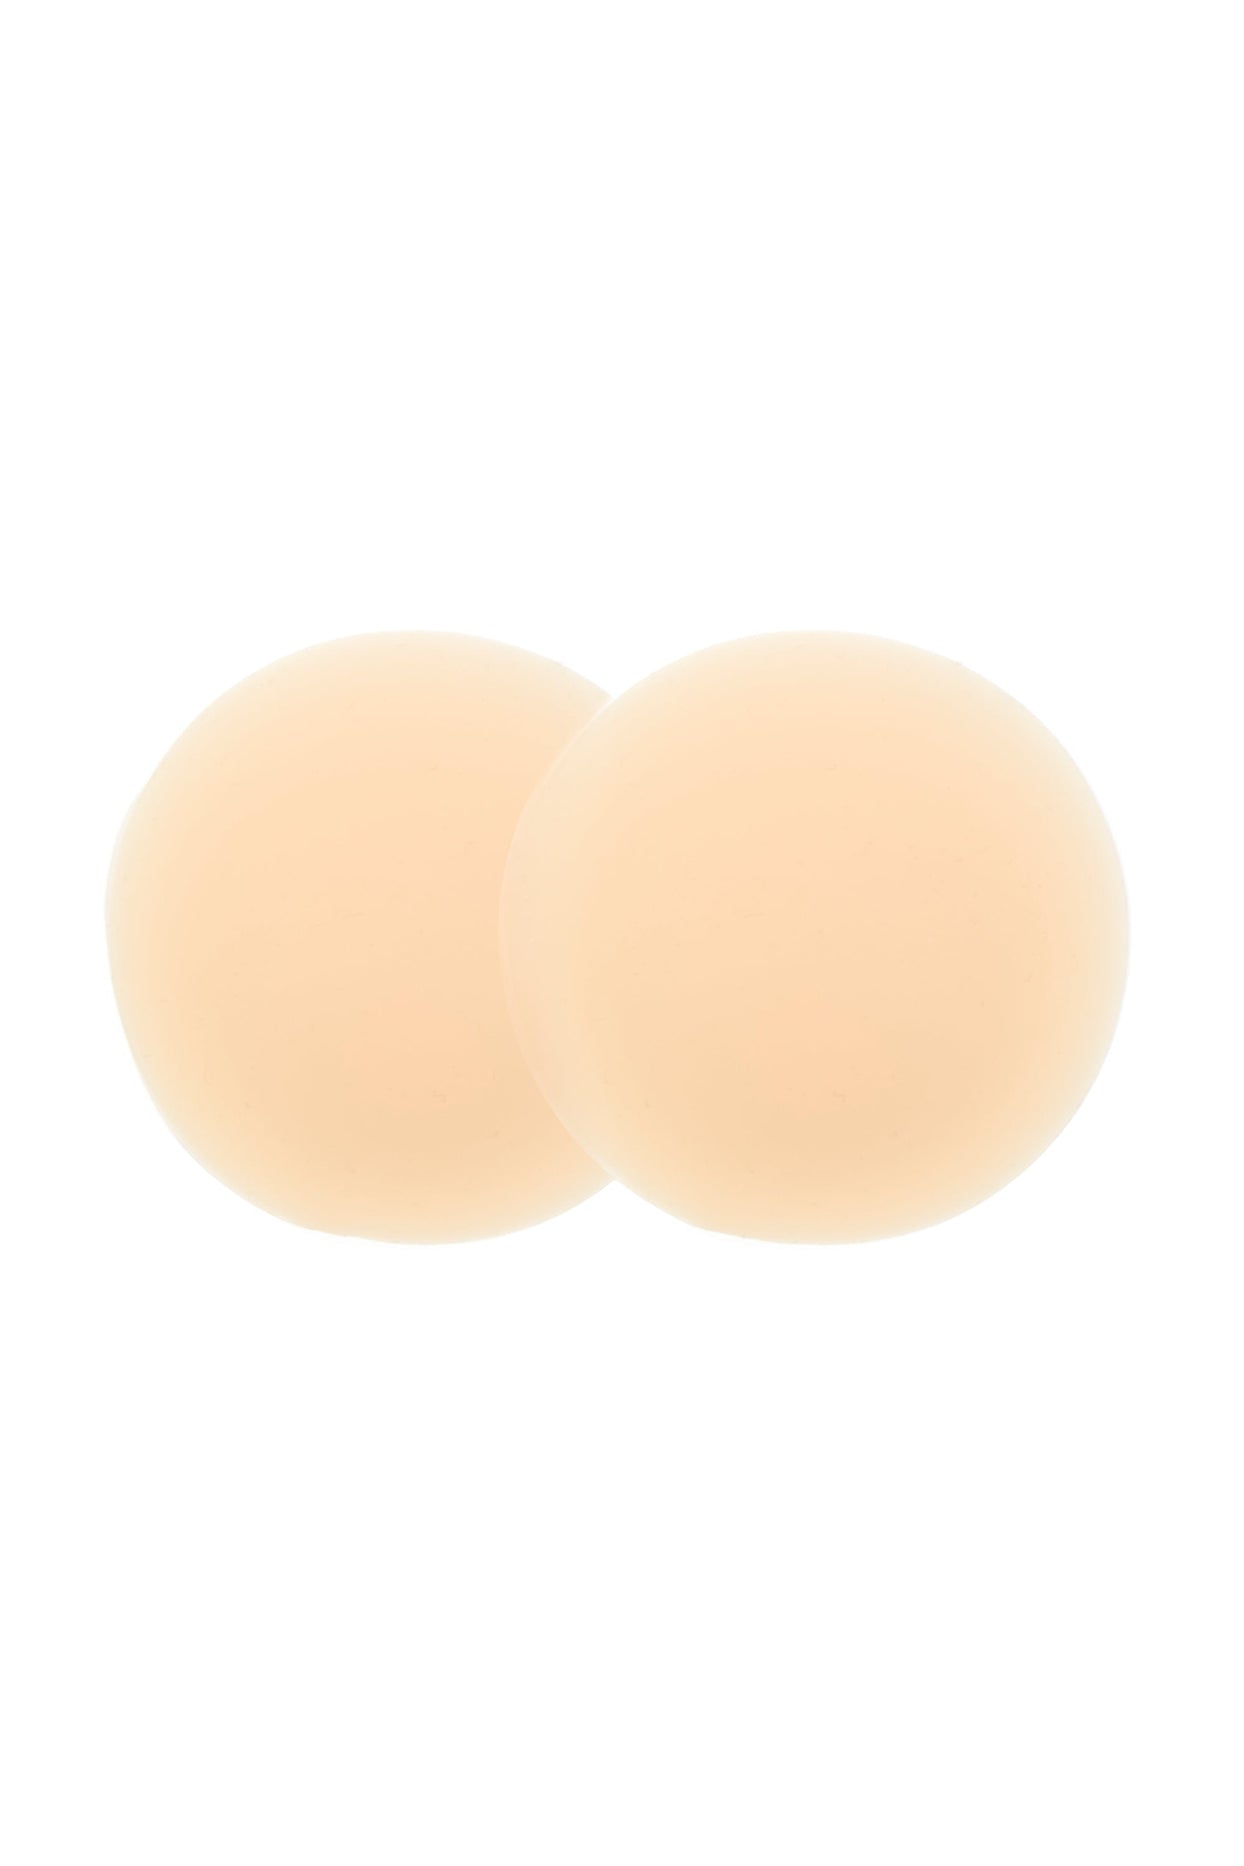 Reusable Silicone Nipple Covers in Almond